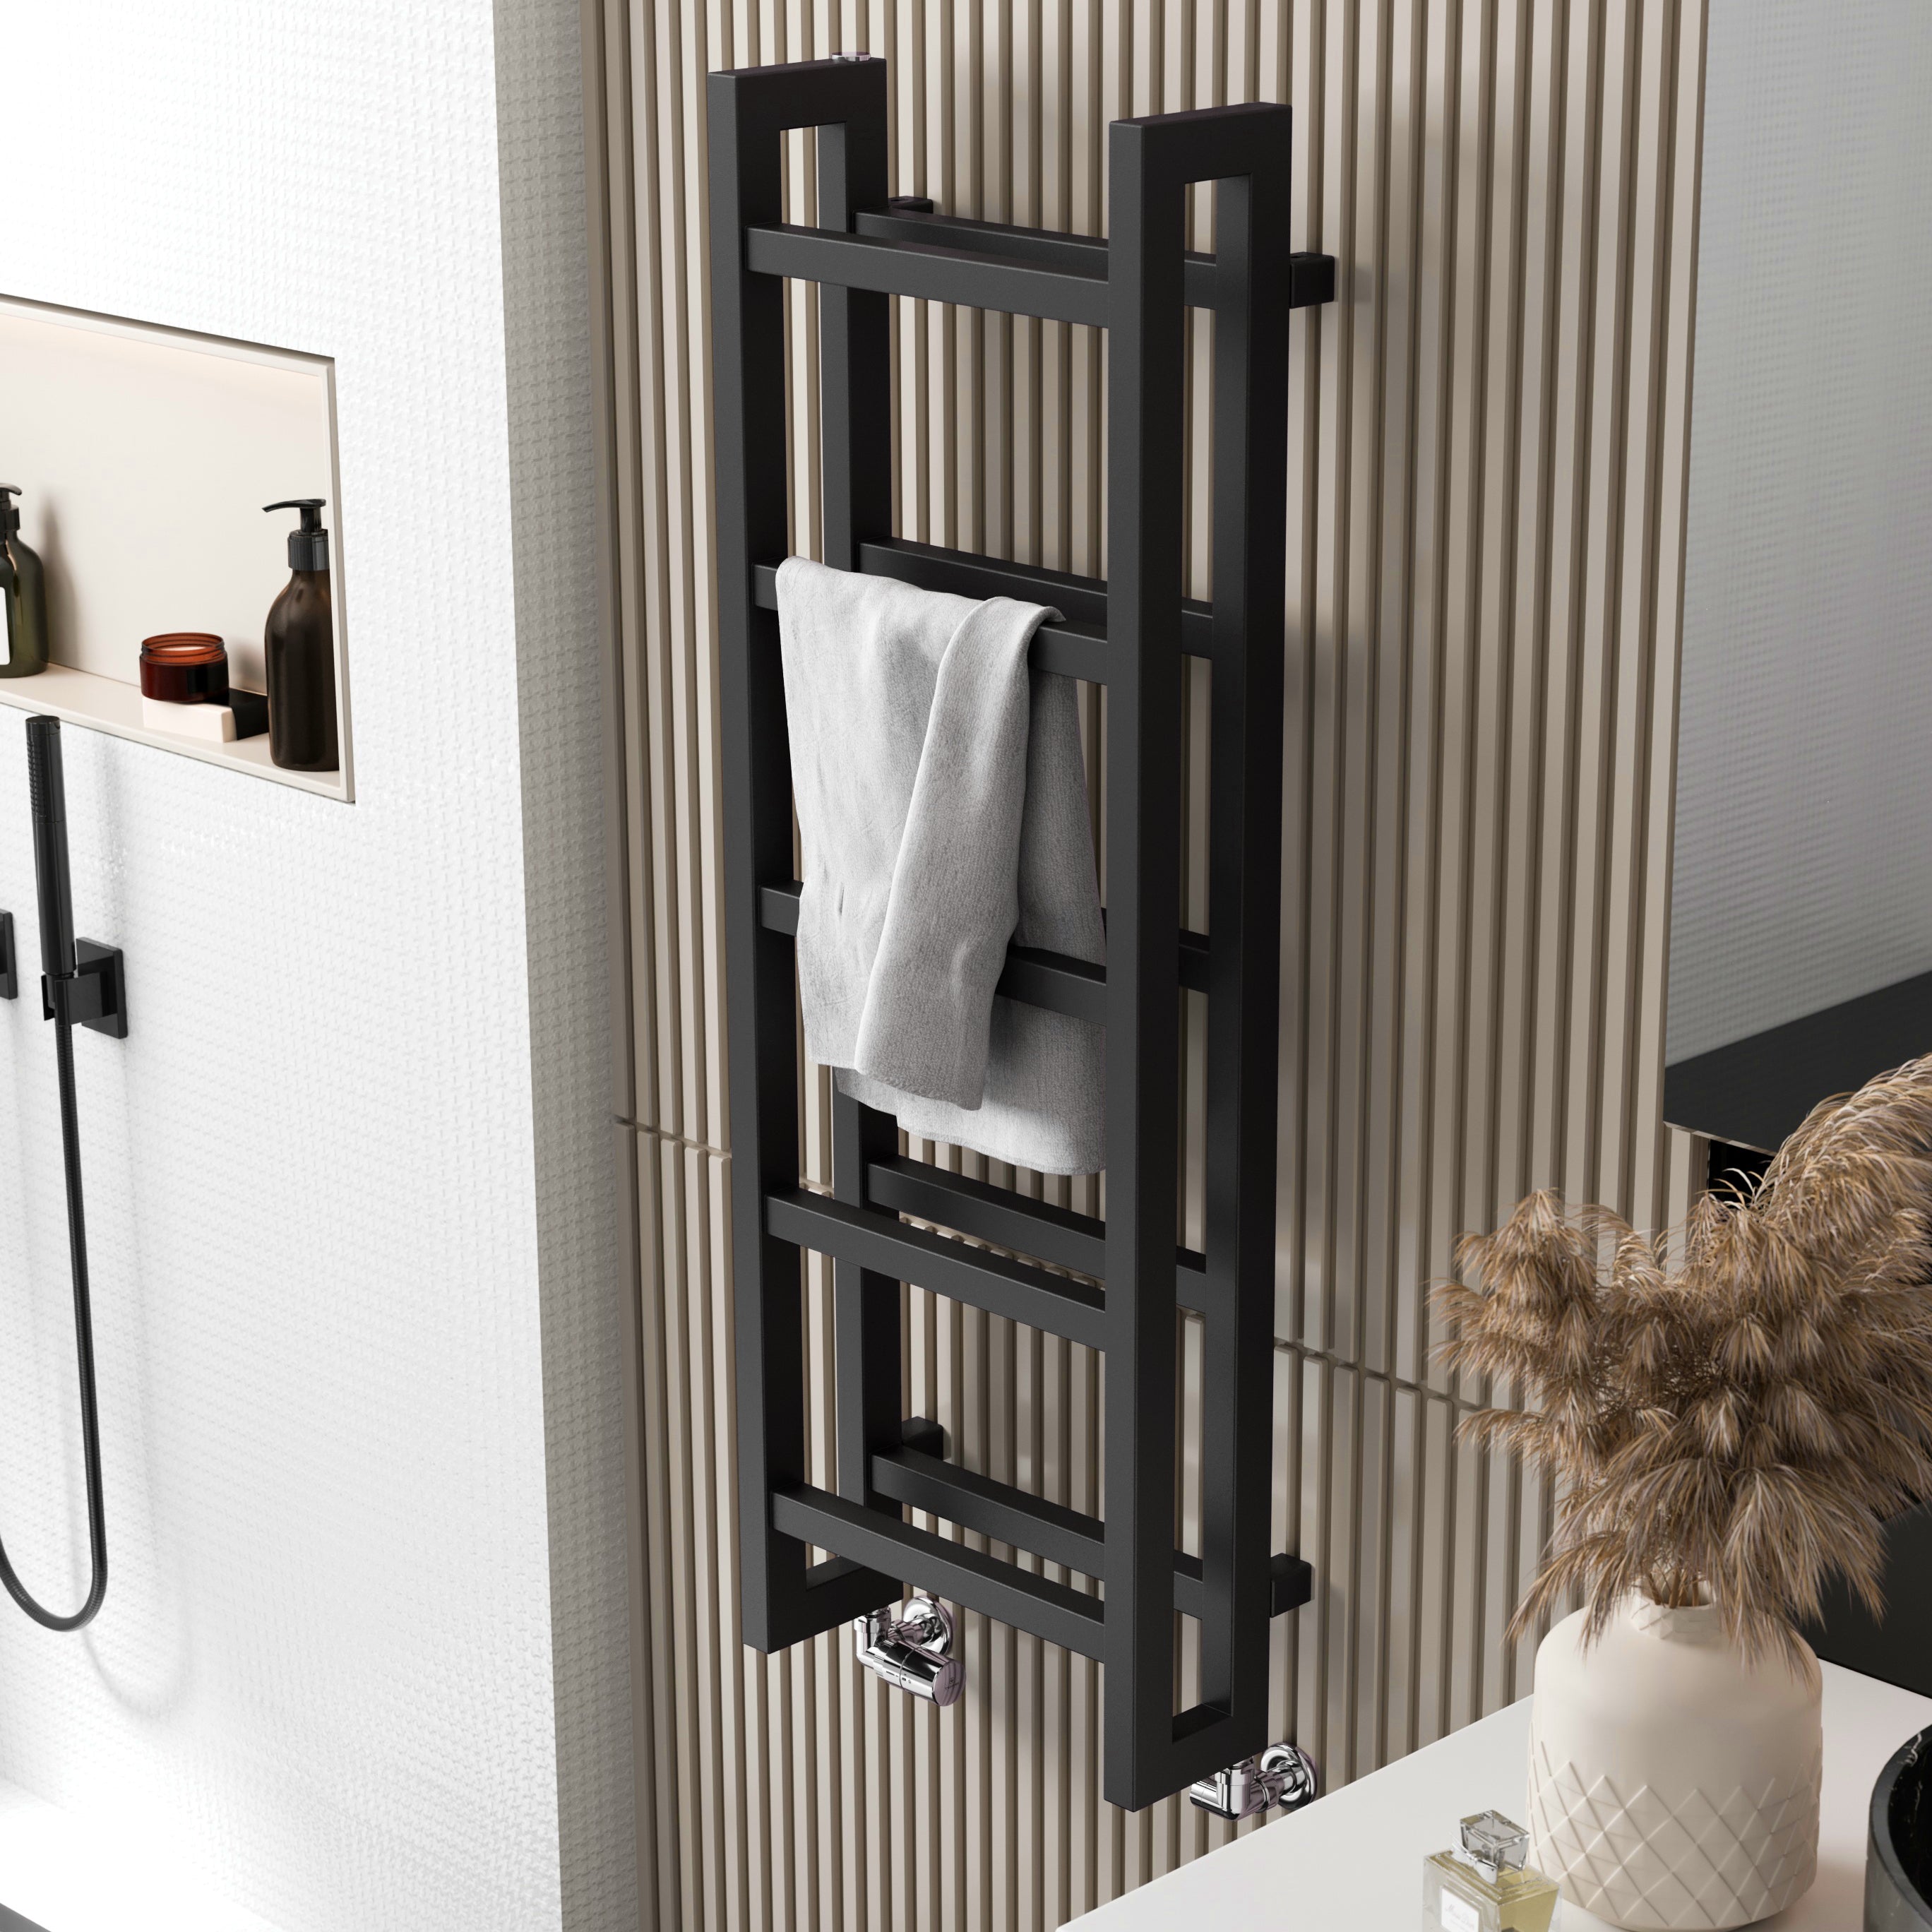 The Stand black towel rail resembles a minimalist ladder. It is shown mounted to a wood-panelled bathroom wall with a hand towel over one rung.